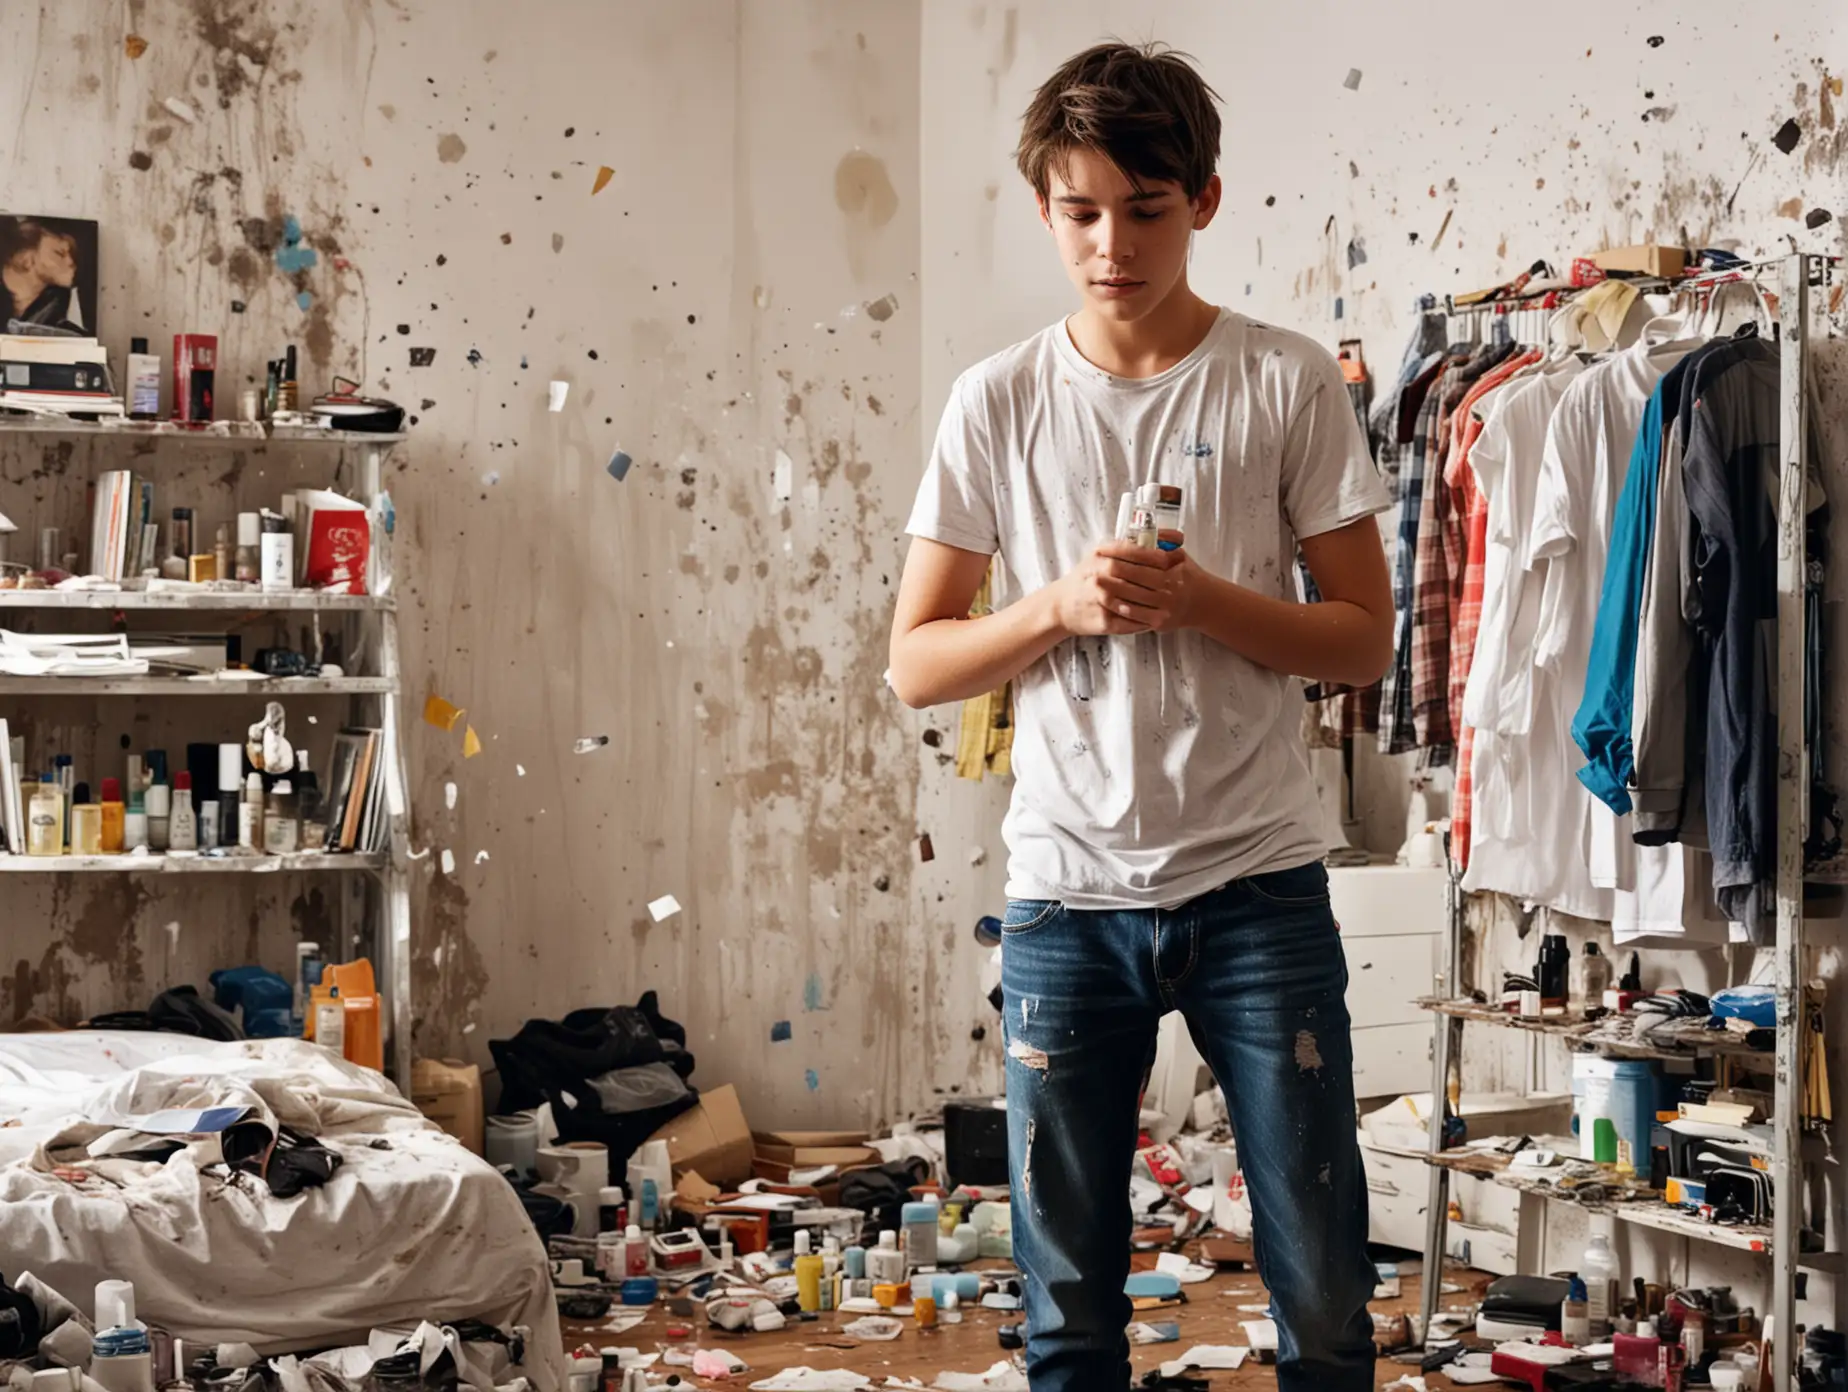 A teenage boy standing in his messy room spraying himself eagerly with cheap cologne